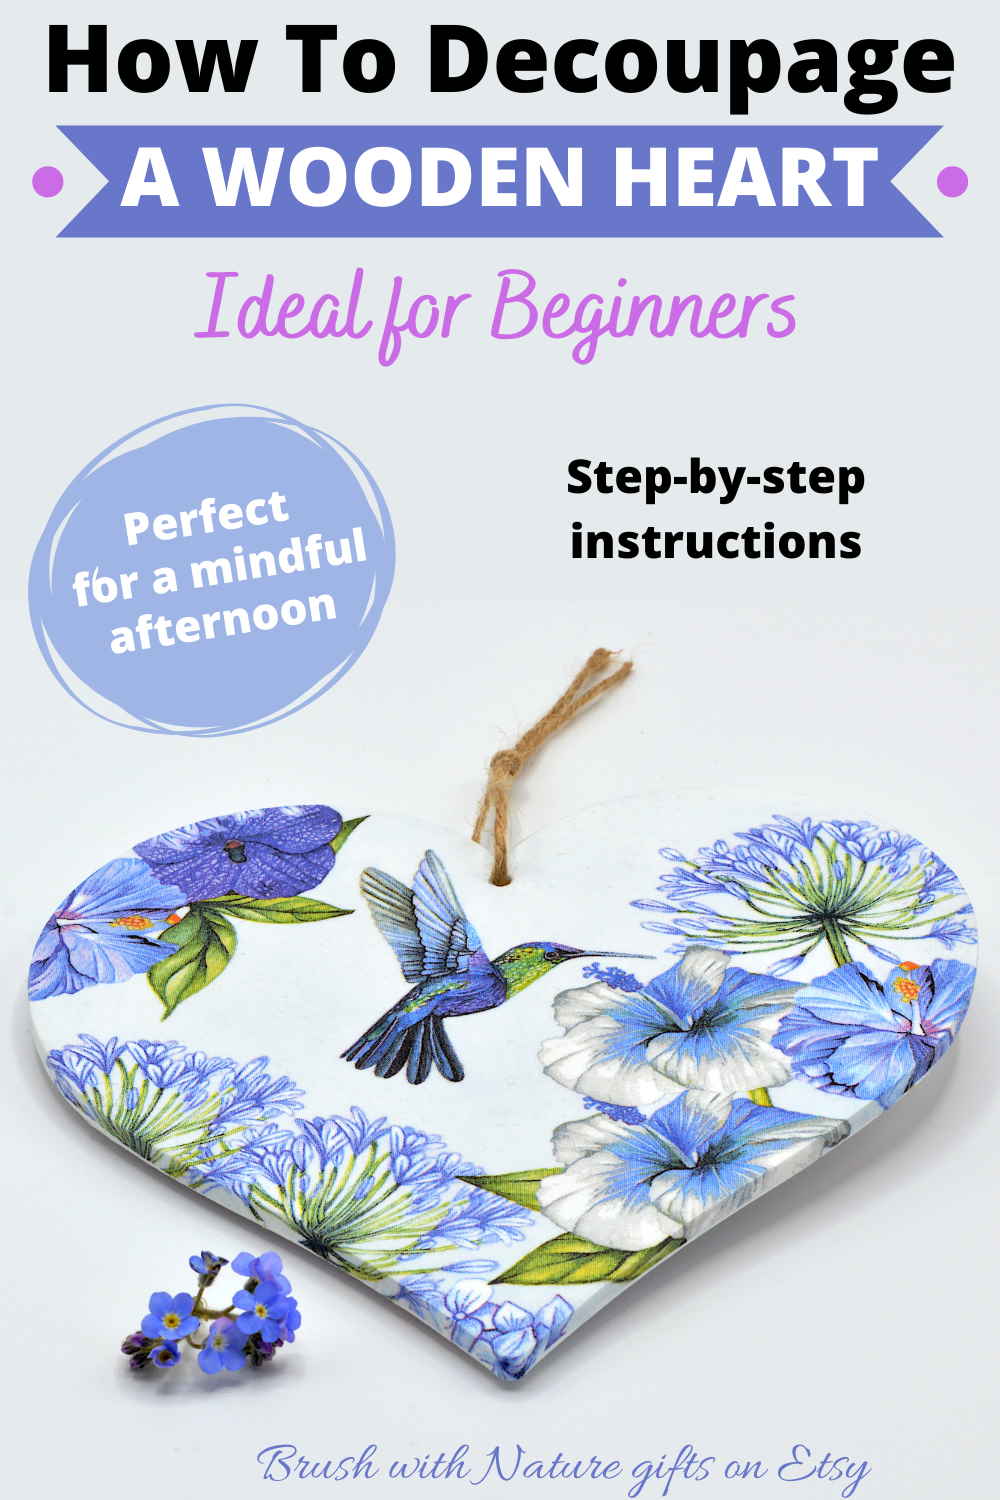 How to decoupage a wooden heart with step-by-step instructions